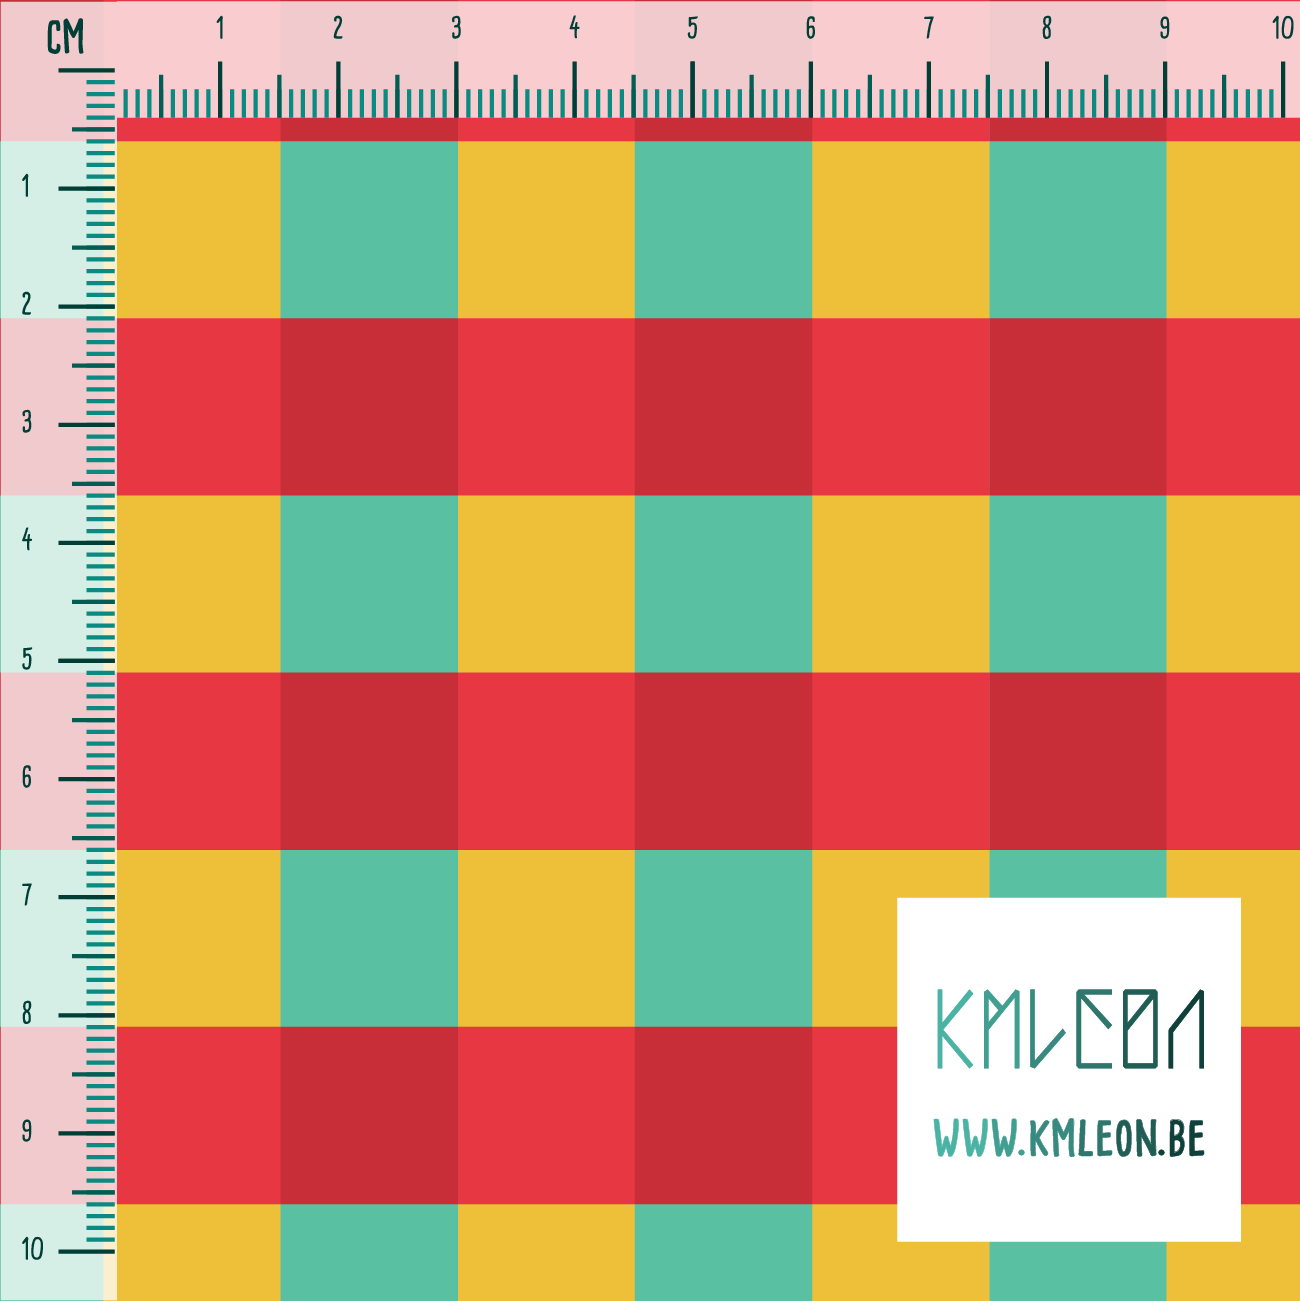 Yellow, teal and red gingham fabric